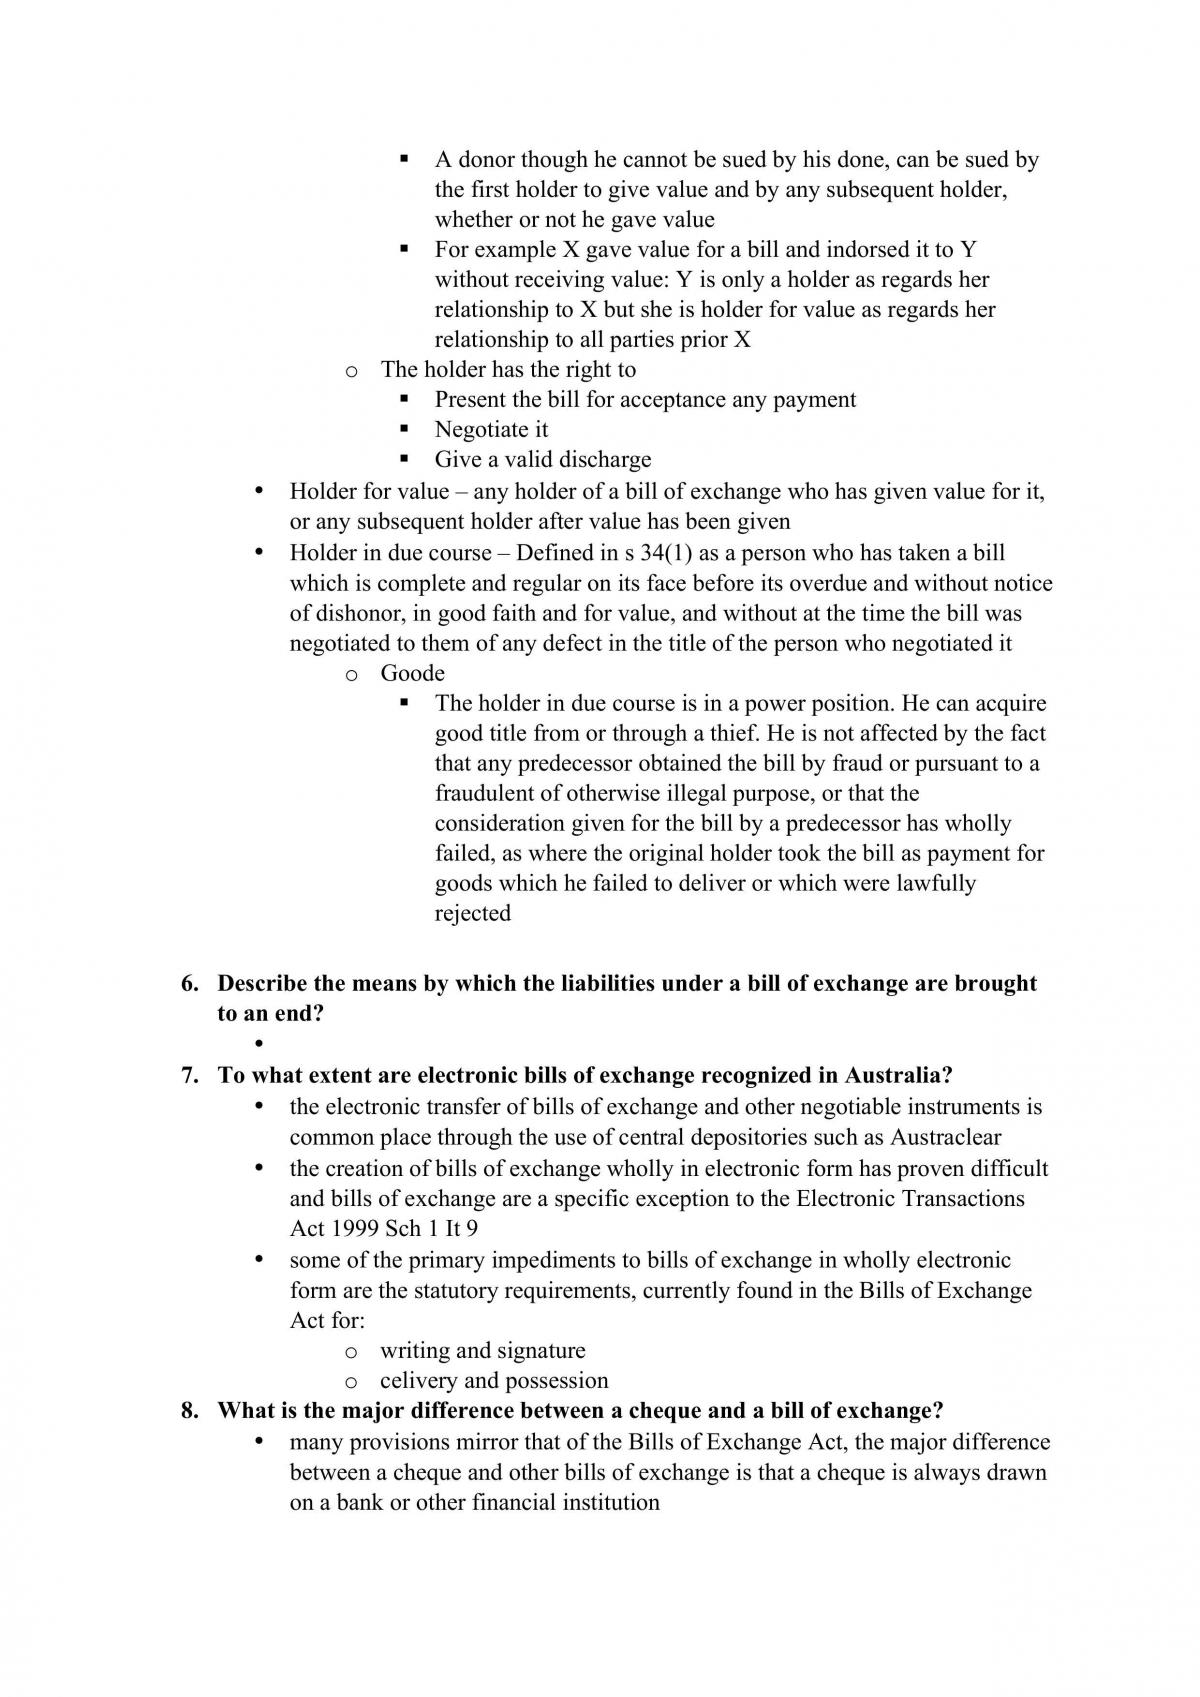 Foundations of Commercial Law Full Course Notes - Page 48